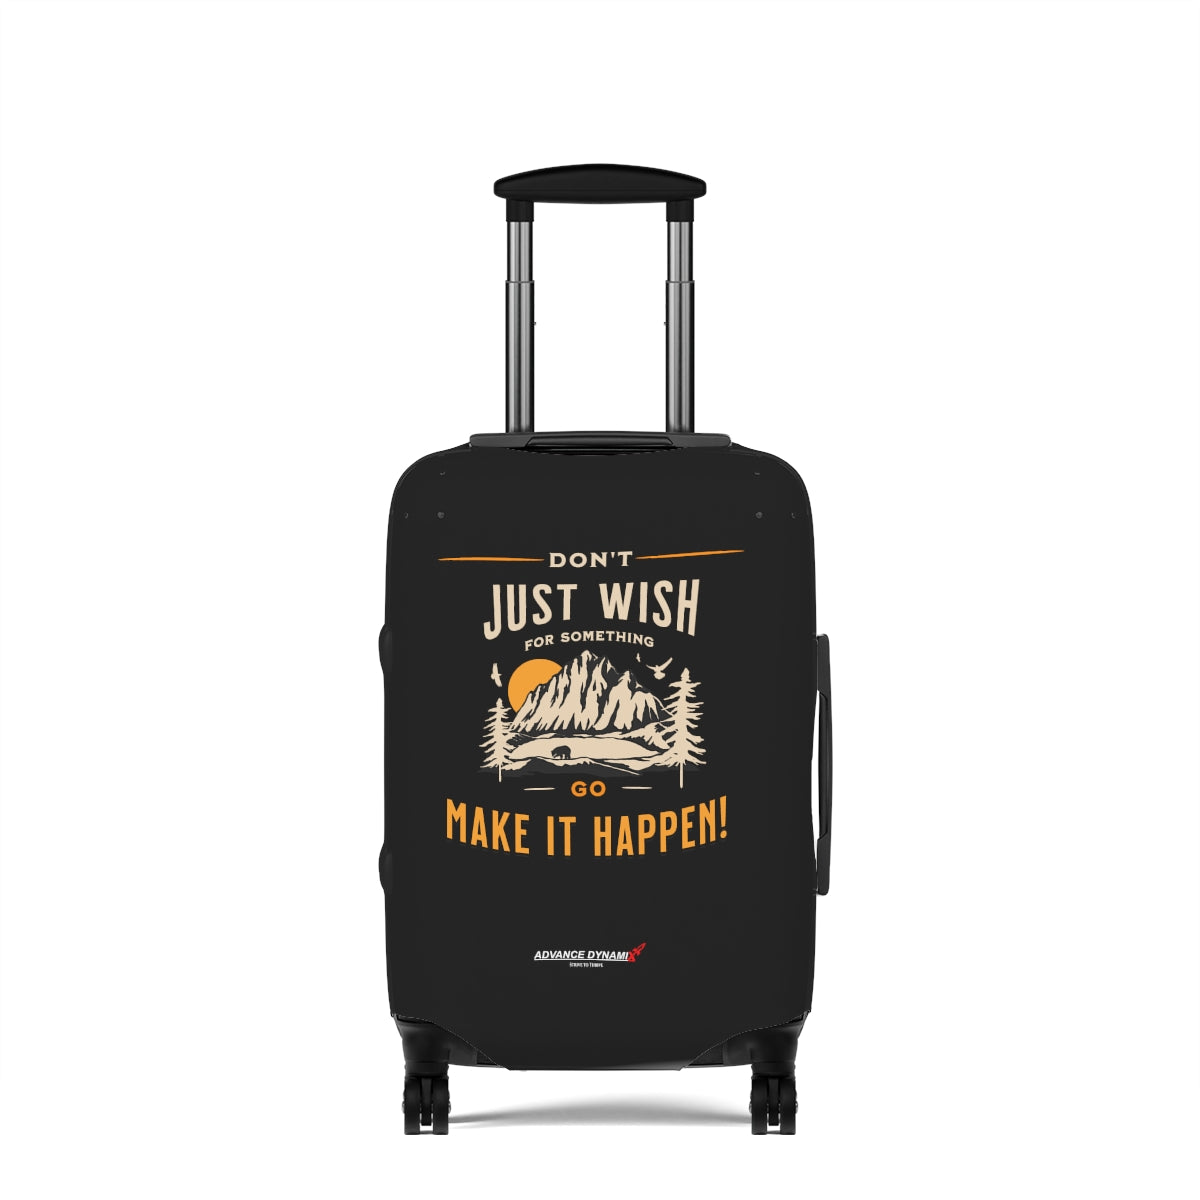 Don't just wish for something, go make it happen. - Luggage Covers Infused with Advance Dynamix Add-A-Tude - Tell the world!